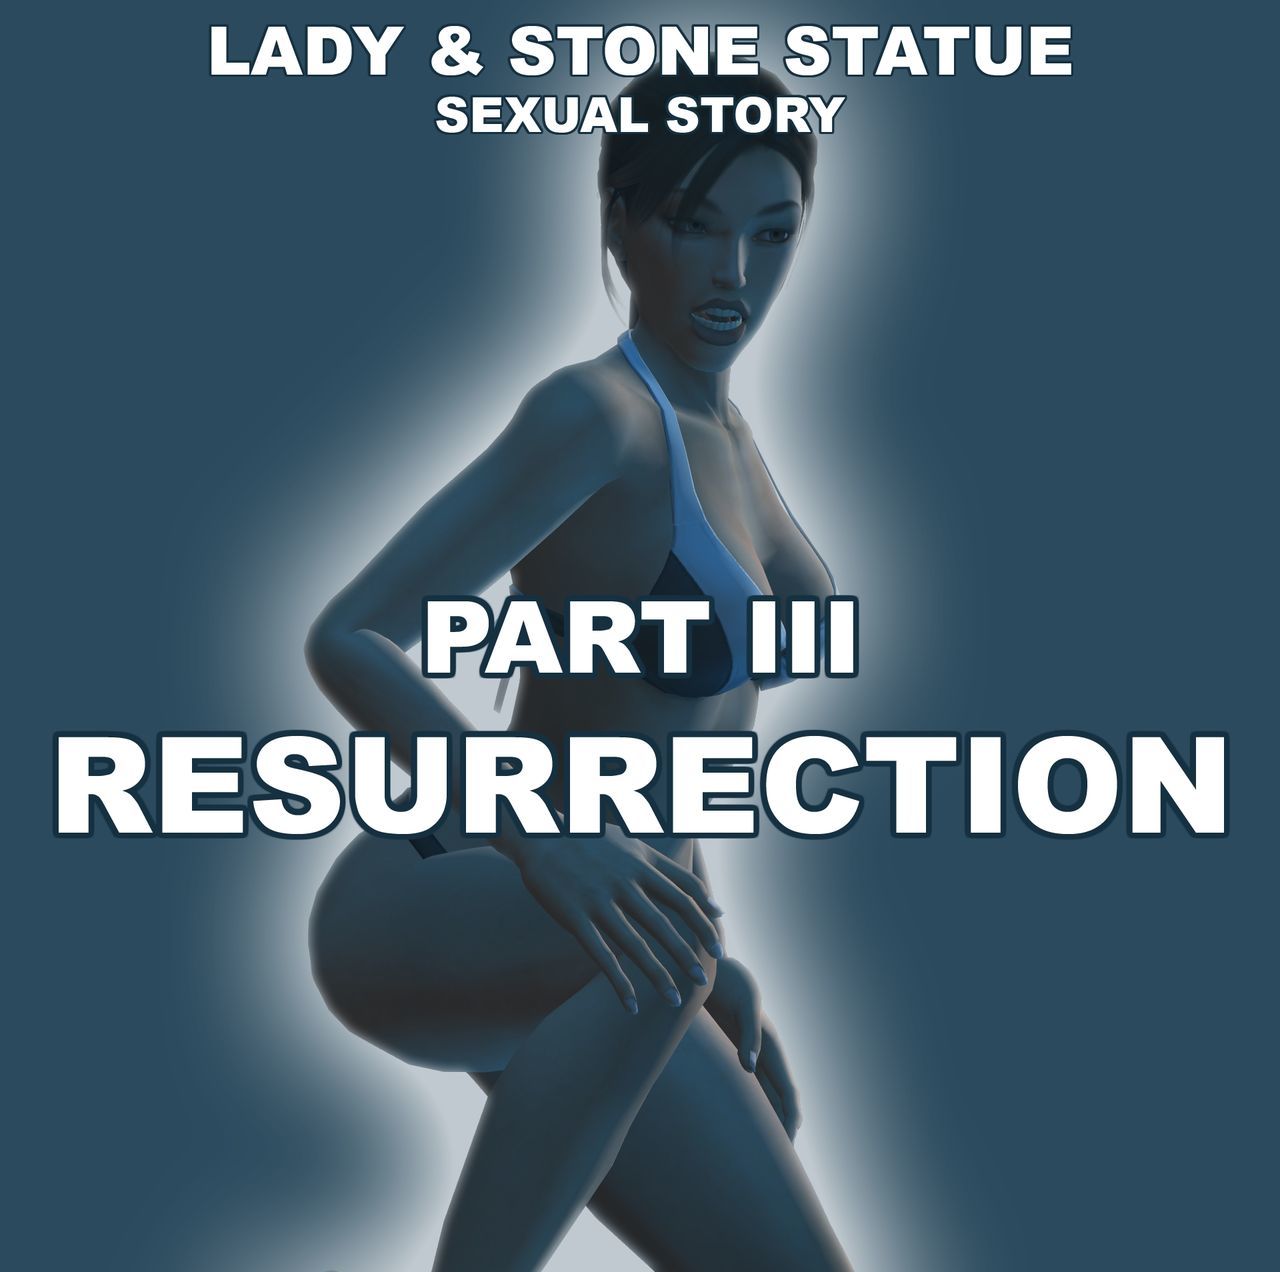 Lady & Stone Statue - Sexual Story Part III of III